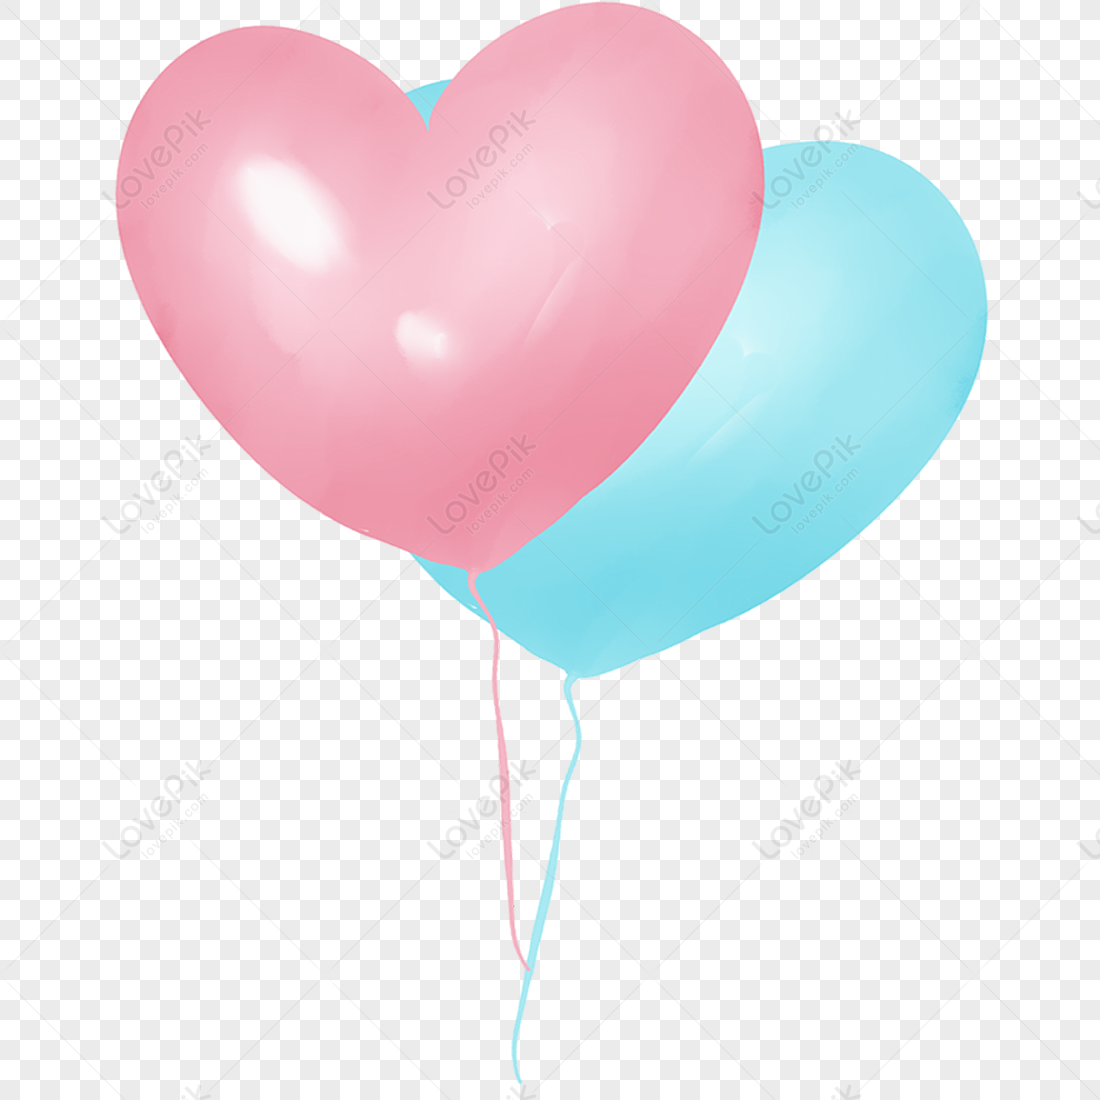 Balloon PNG Transparent Background And Clipart Image For Free Download -  Lovepik | 400230060